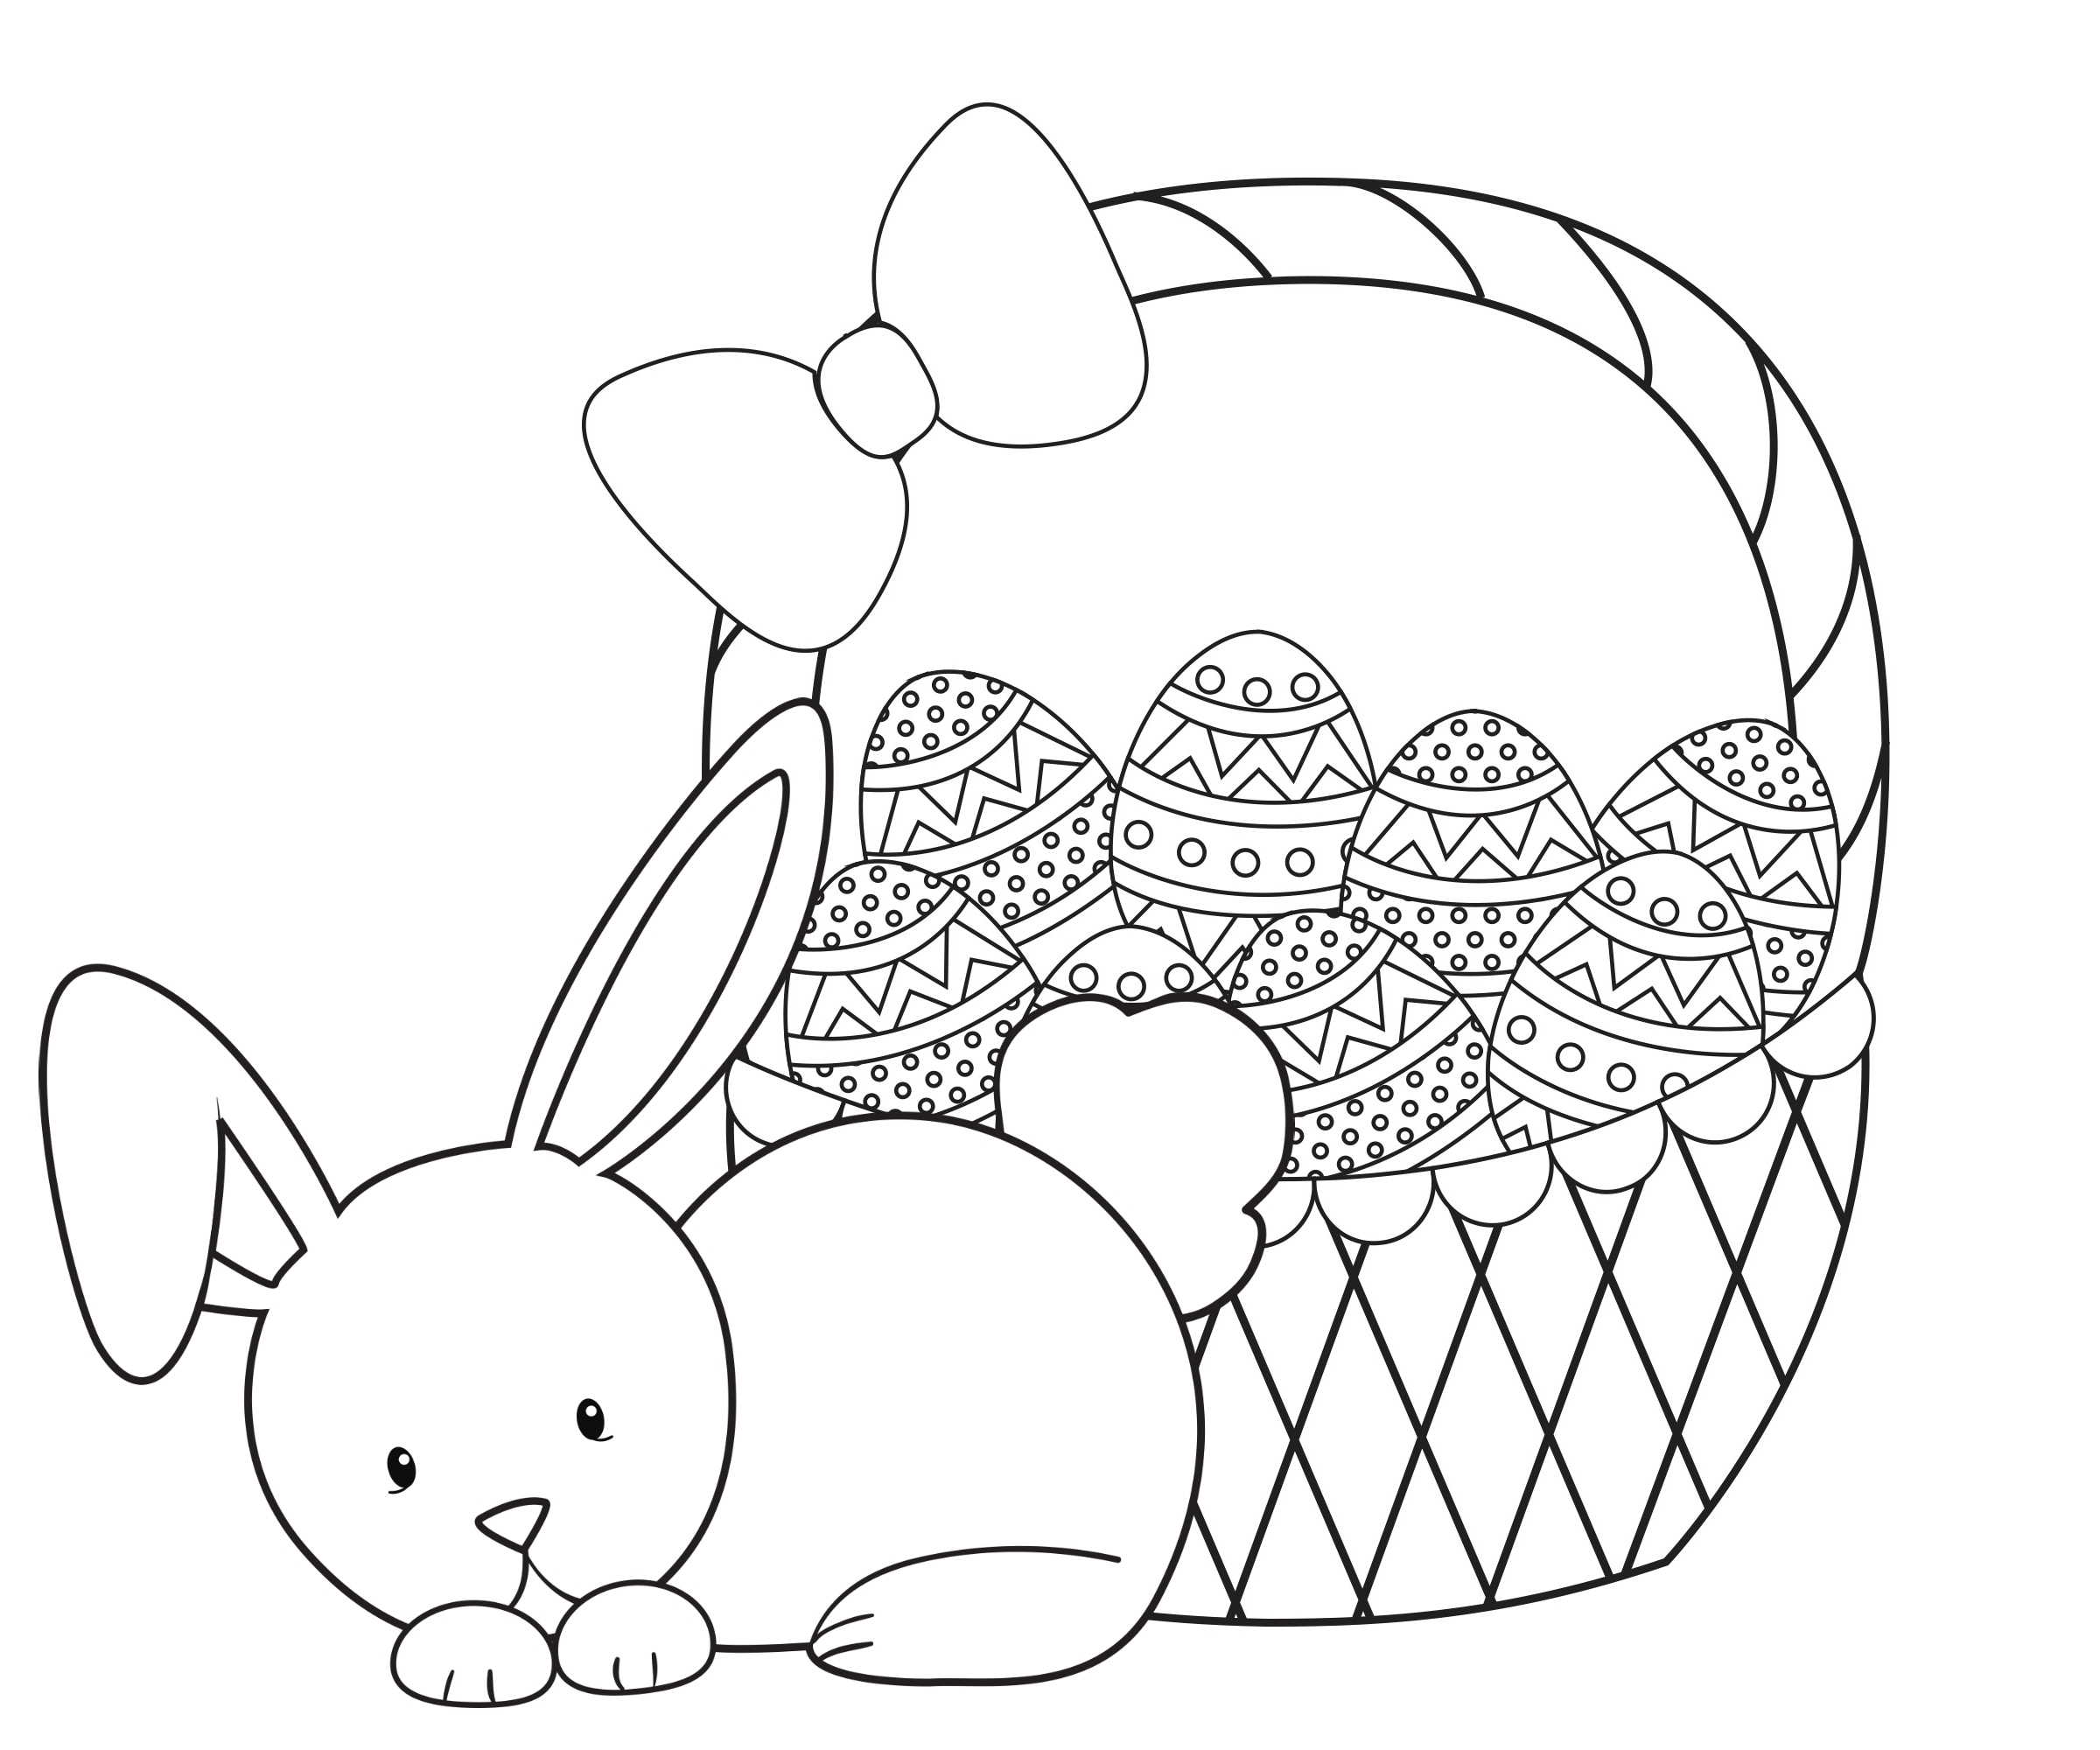 Simple Easter Bunny Coloring Pages at GetDrawings | Free download